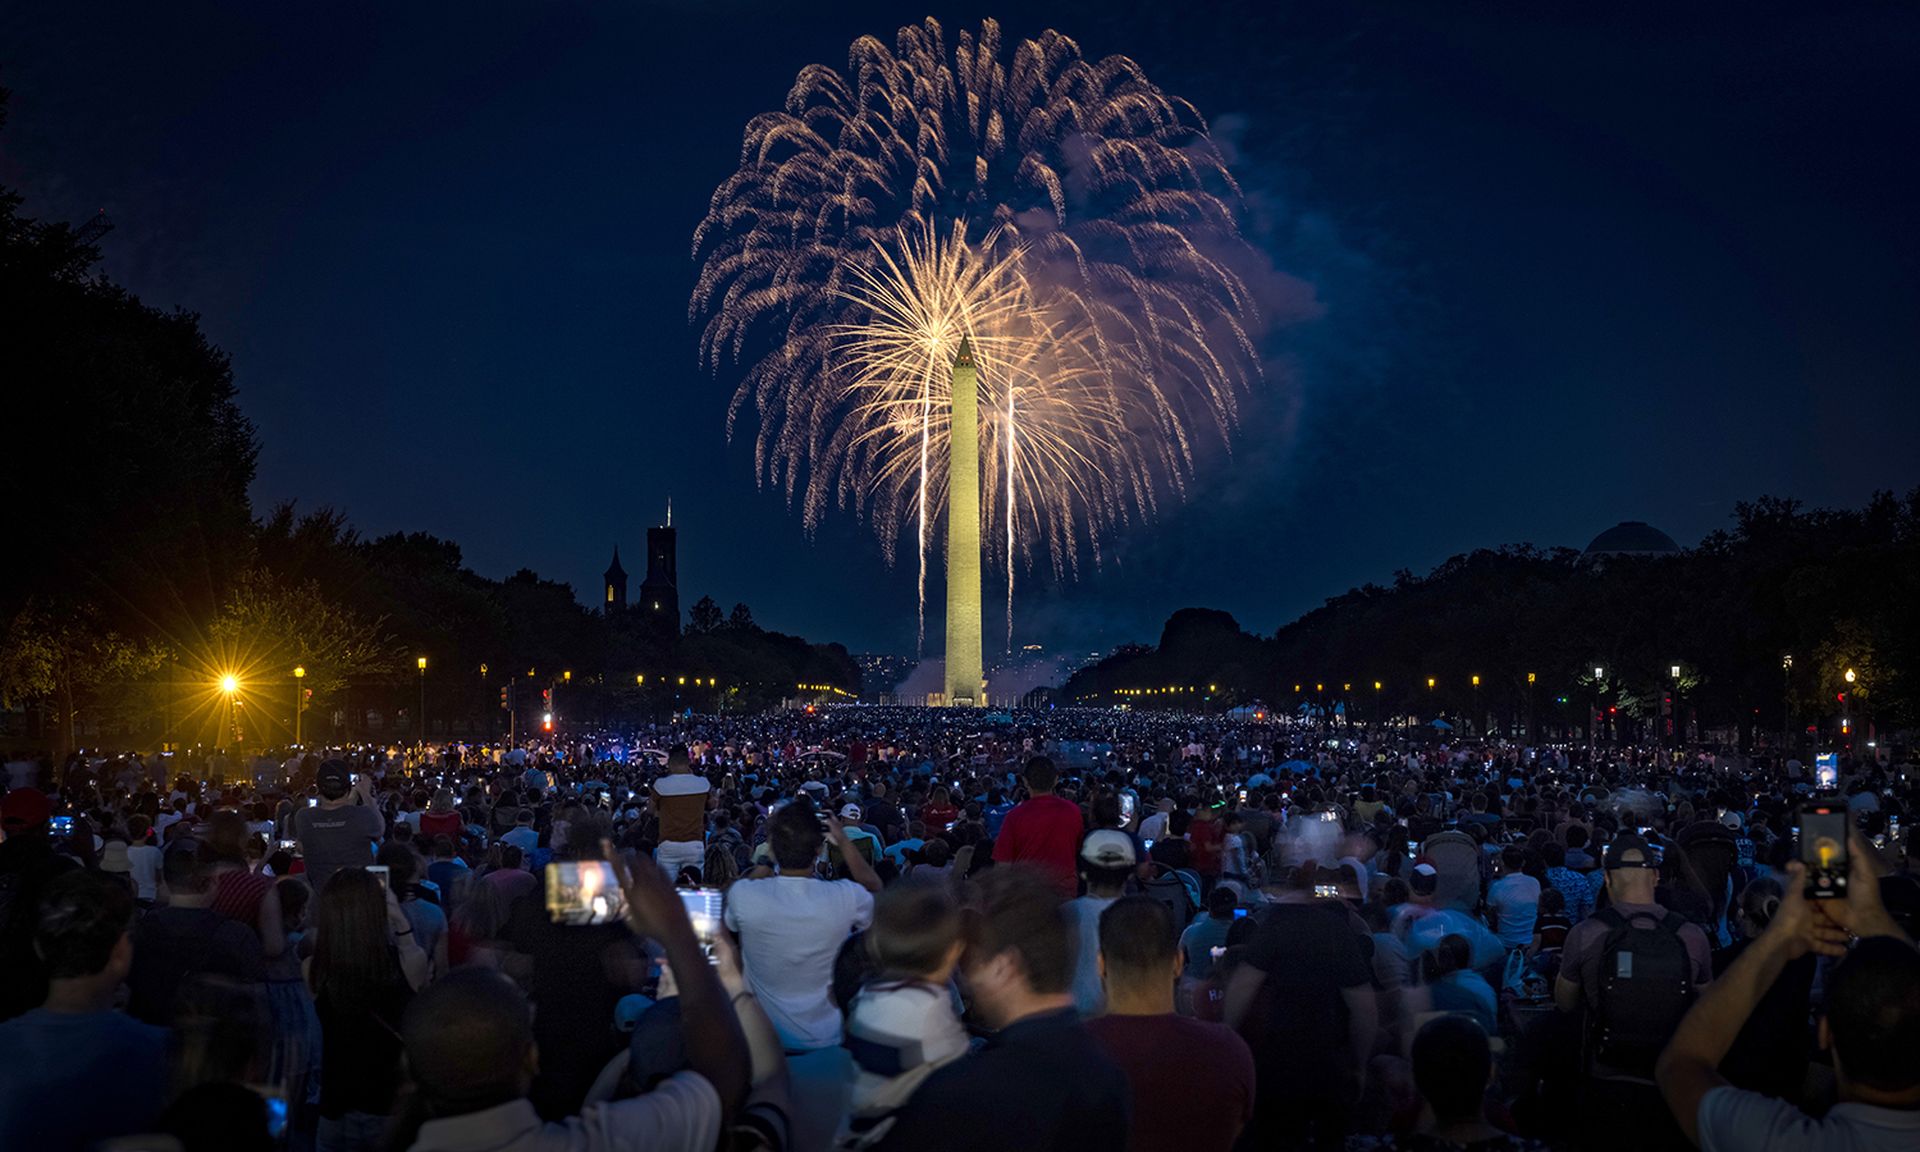 People fill the National Mall to watch the fireworks display during Independence Day celebrations on July 4, 2021, in Washington. (Photo by Samuel Corum/Getty Images)